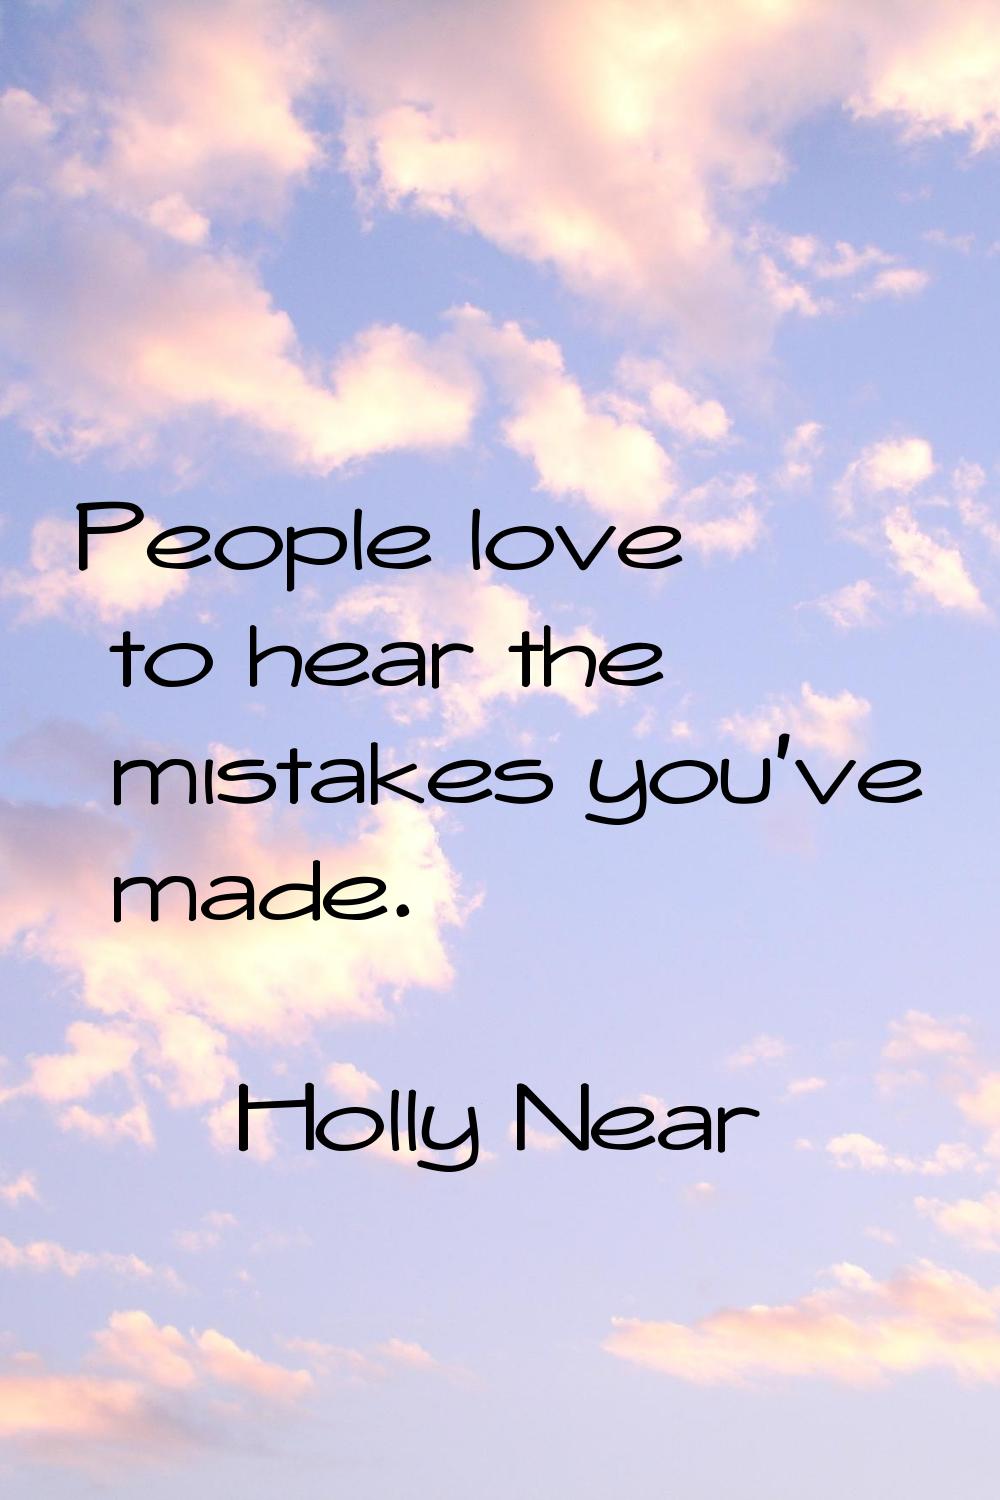 People love to hear the mistakes you've made.